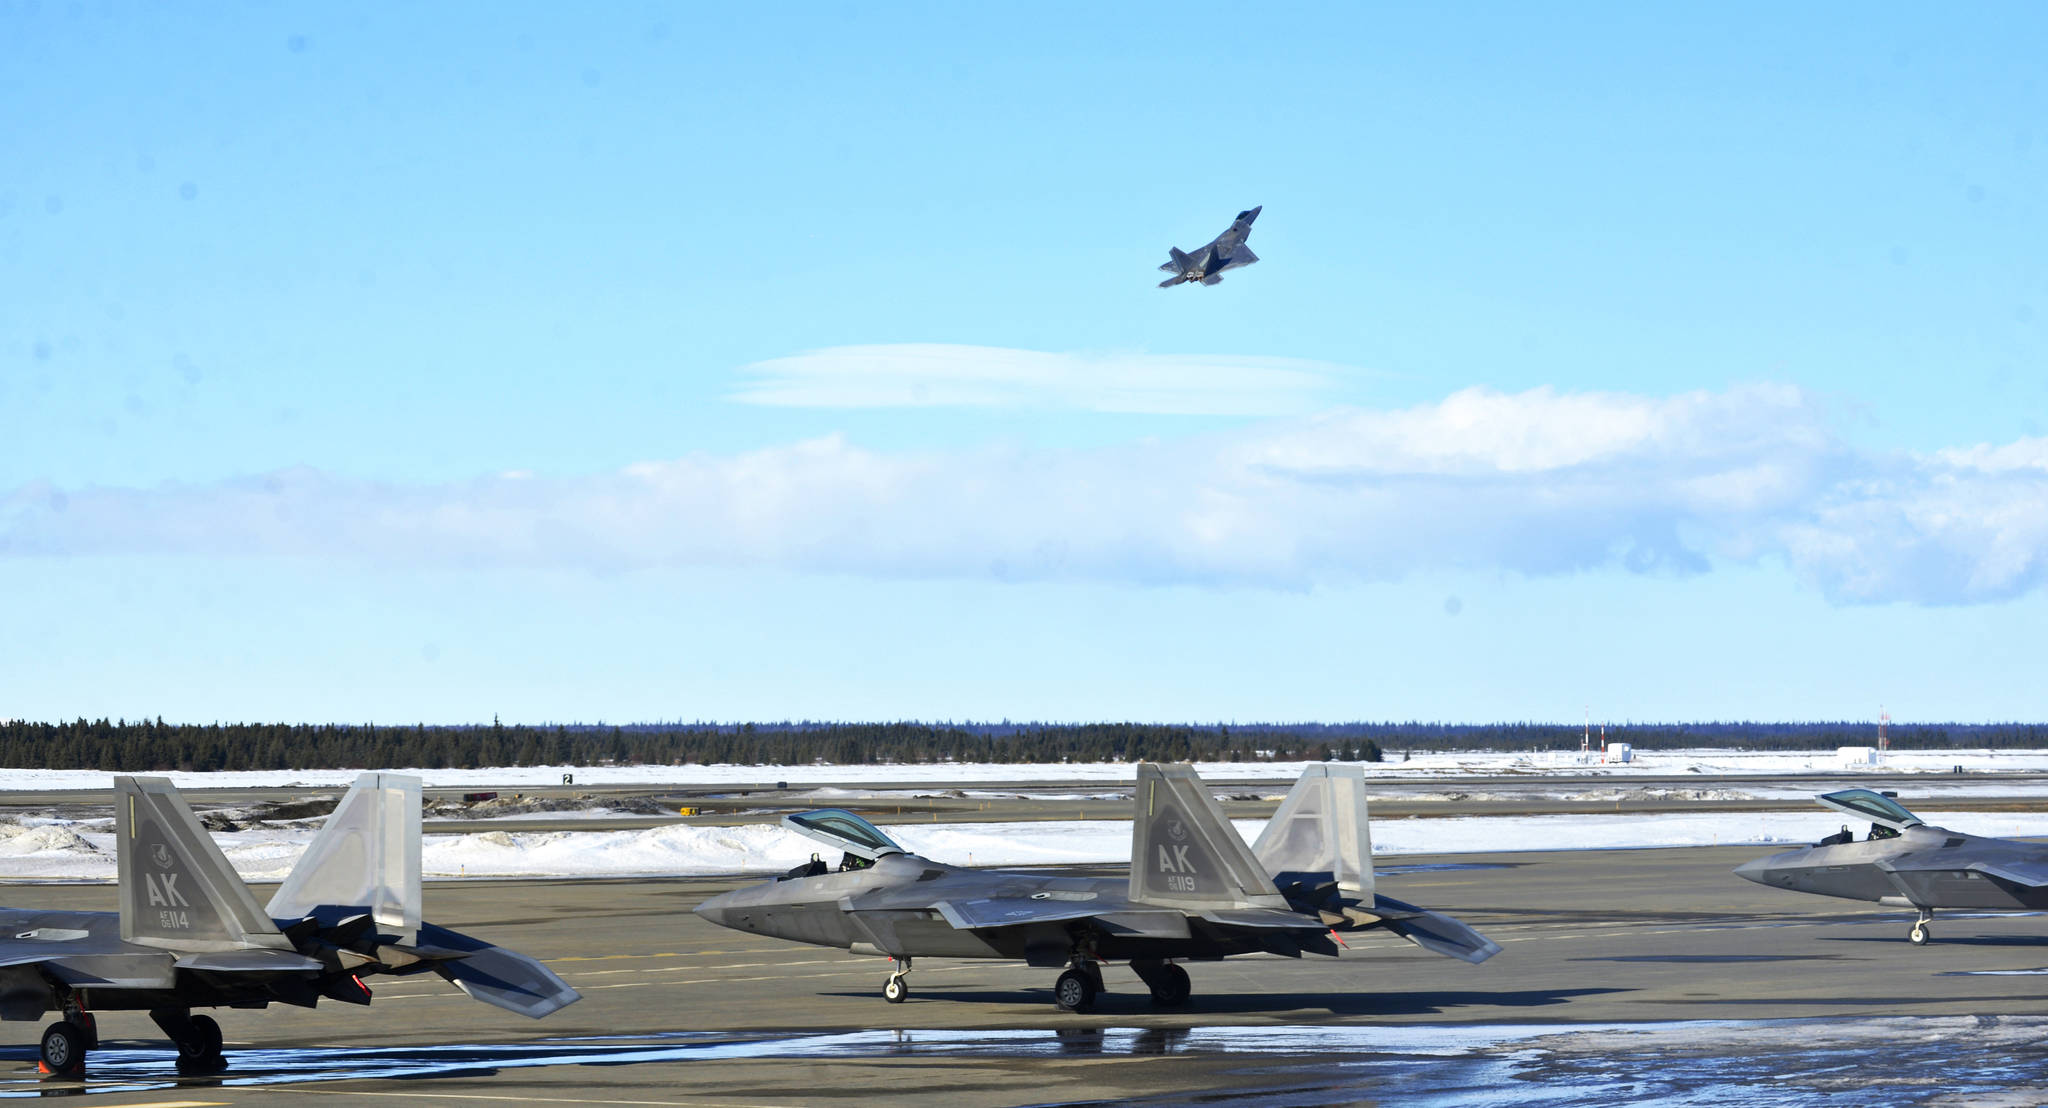 A U.S. Air Force F-22 “Raptor” fighter jet takes off from the Kenai Municipal Airport on Monday, March 19, 2018 in Kenai. Weather conditions stopped the fighters from landing at Joint Base Elmendorf-Richardson in Anchorage, their home field. Four of the F-22s belong to the 90th Fighter Squadron and four to the 525th Fighter Squadron, which were on separate training flights before landing in Kenai, said Major Stephen Montgomery, a pilot with the 90th. The fighters took off for Anchorage Monday afternoon. (Photo by Ben Boettger/Peninsula Clarion)